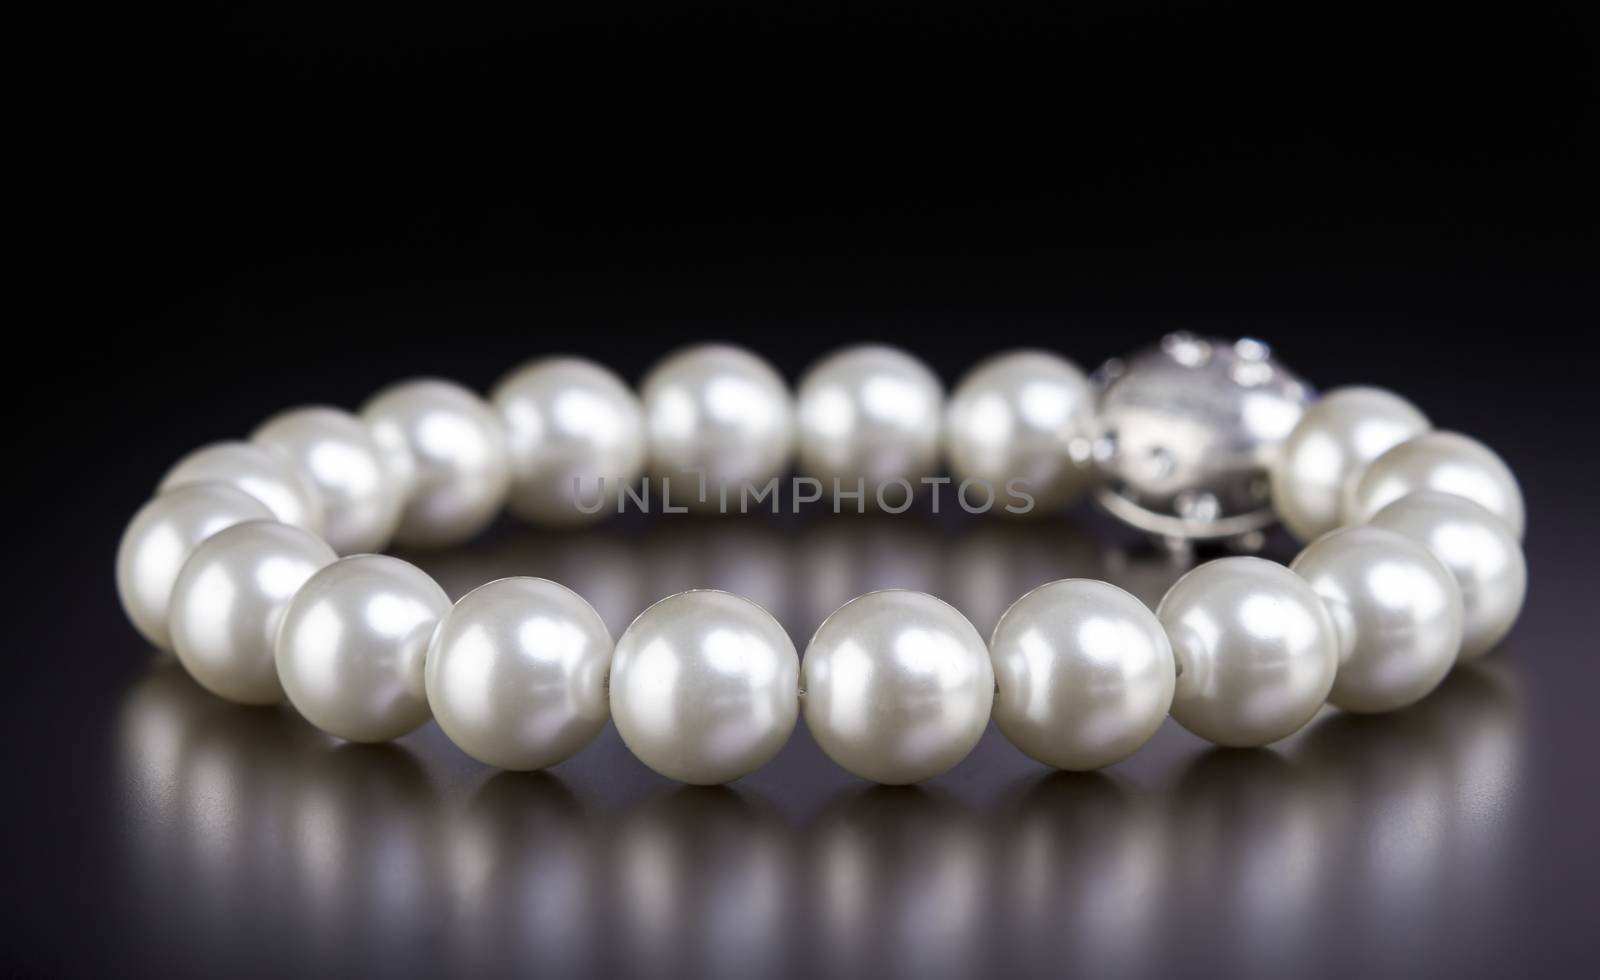 White pearls necklace on black background